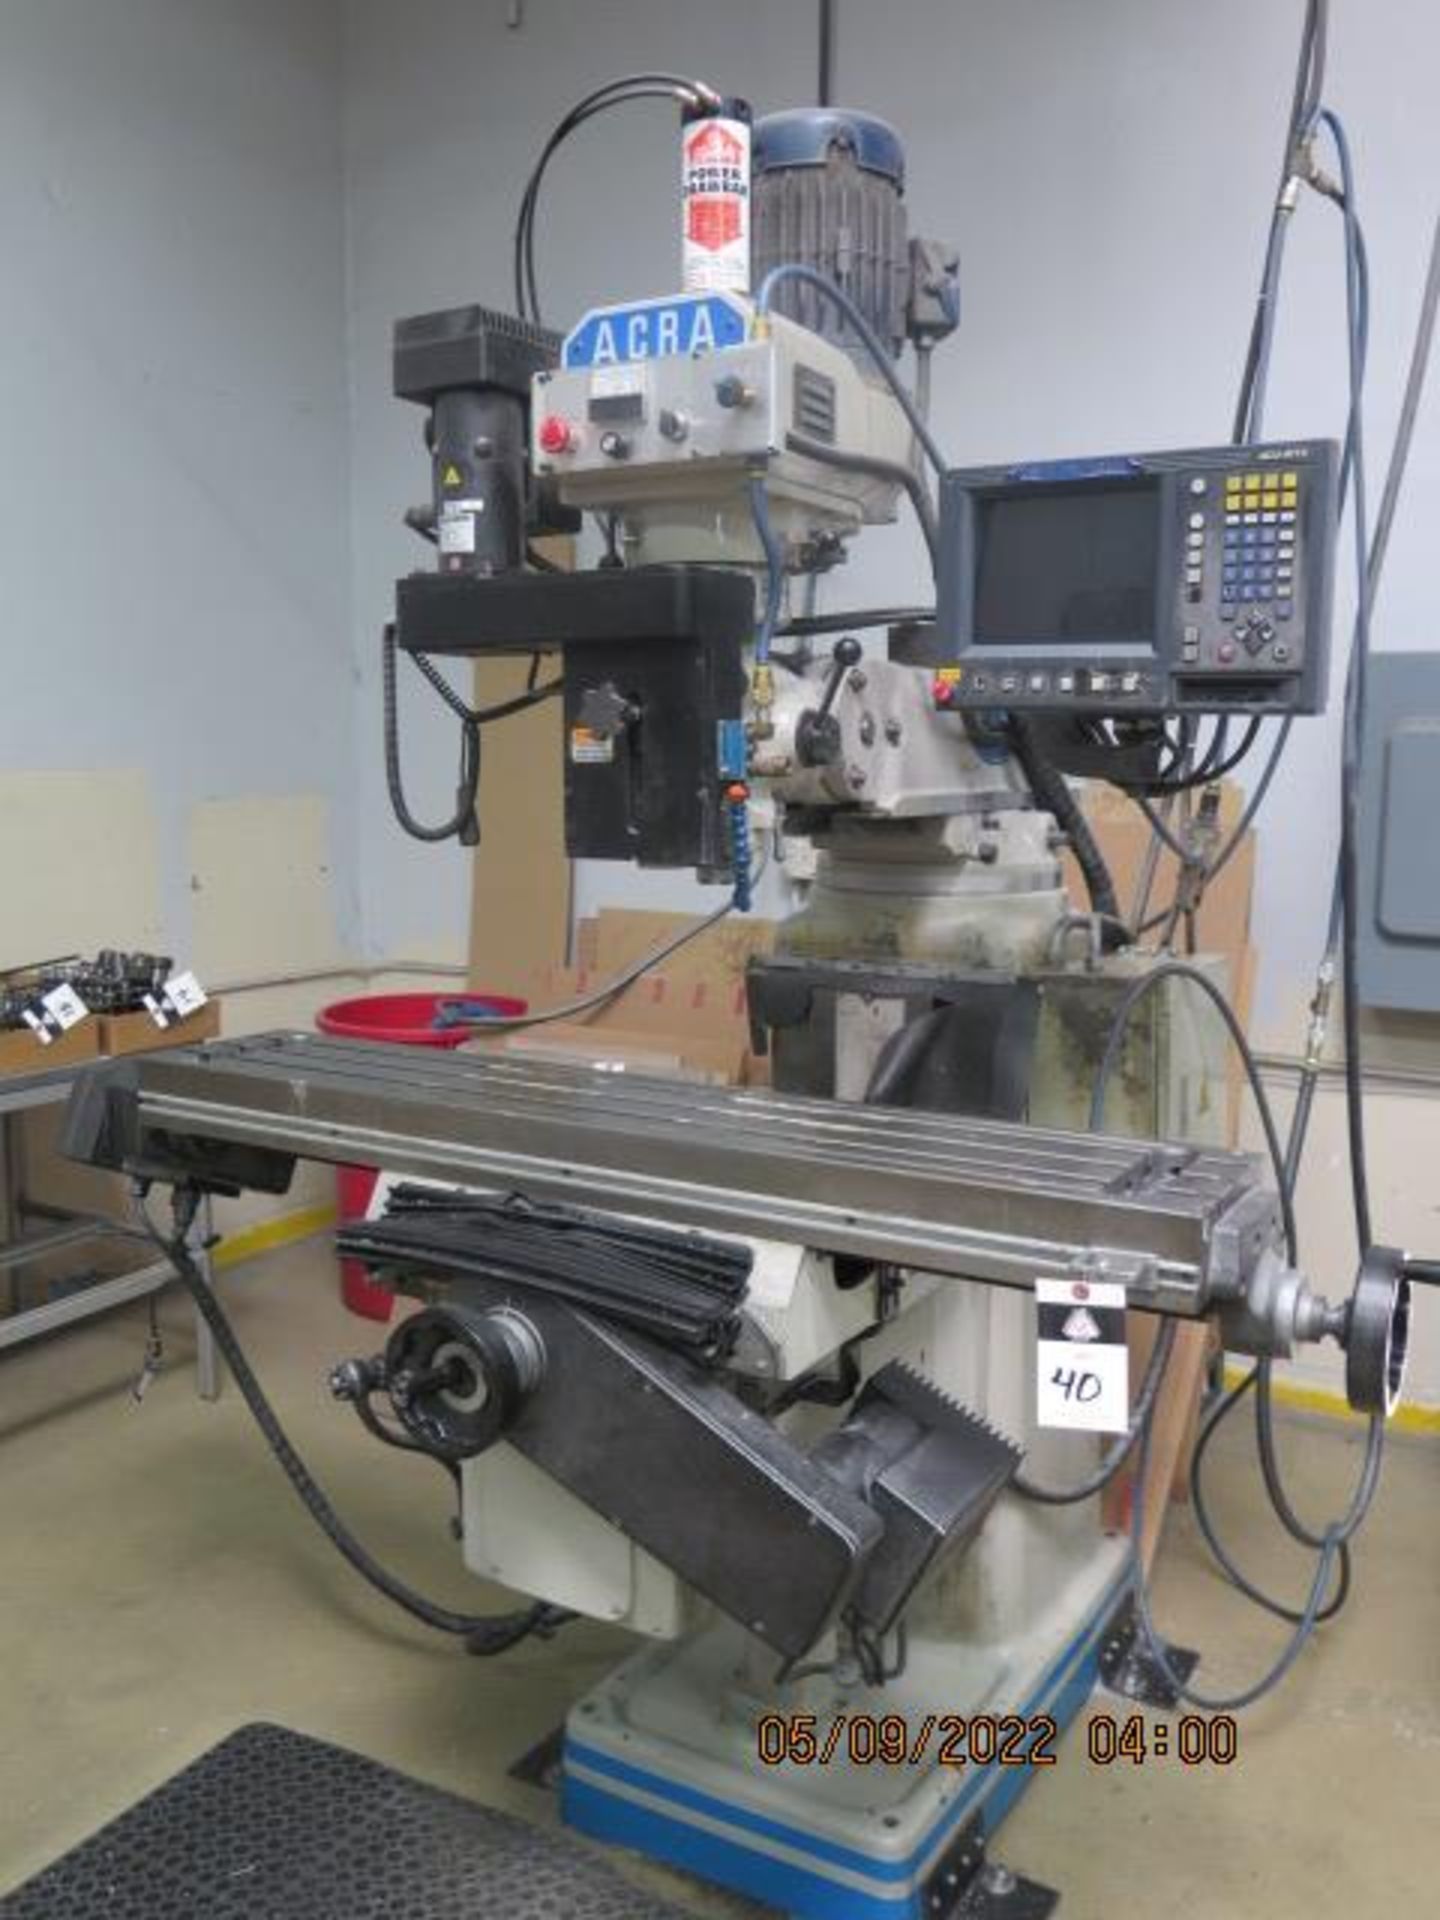 Acra AM3 VVA 3-Axis CNC Vertical Mill s/n 0602183 w/ Acu-Rite CNC, (HAS “Z” FAULT ERROR, SOLD AS IS - Image 2 of 12